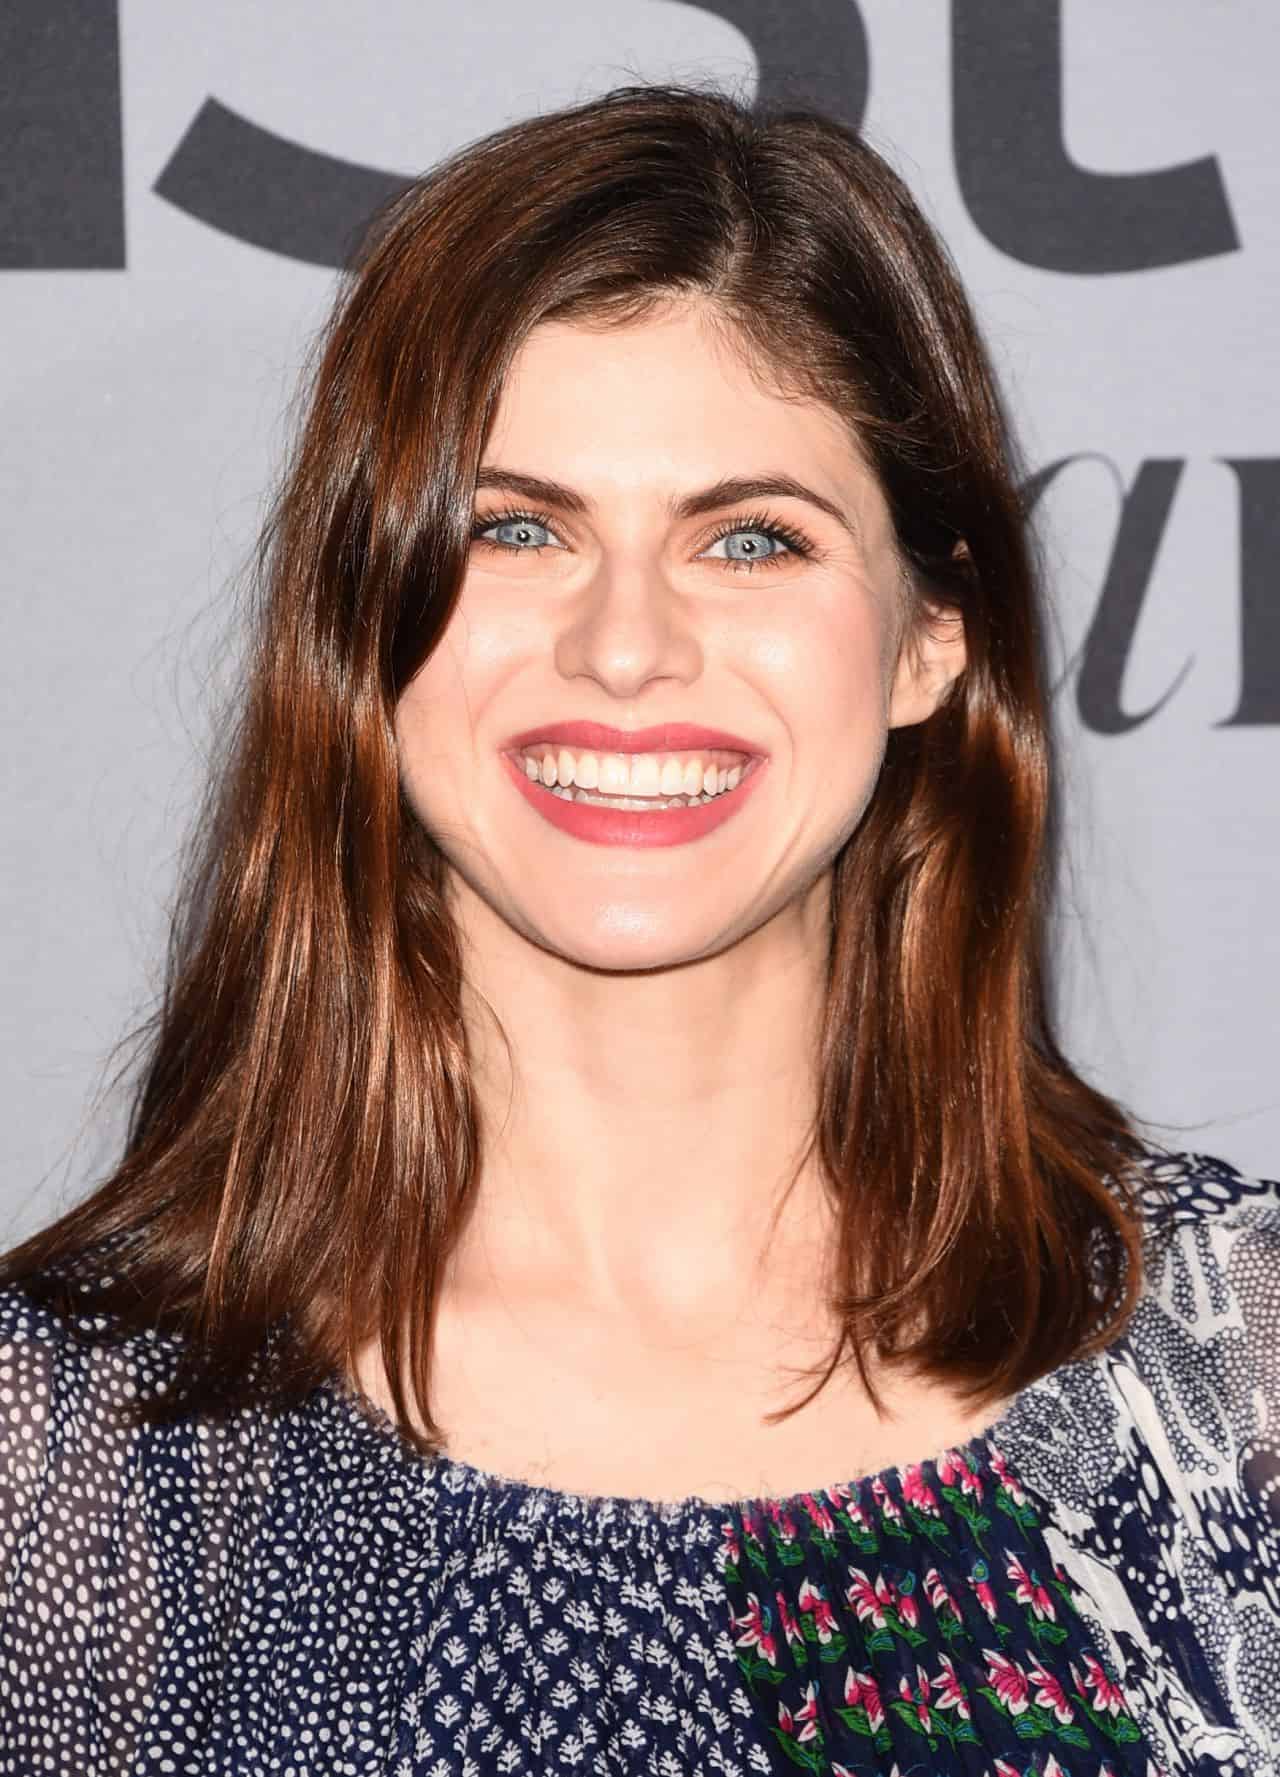 Alexandra Daddario Turns Heads in Blue and Purple Dress at InStyle Awards